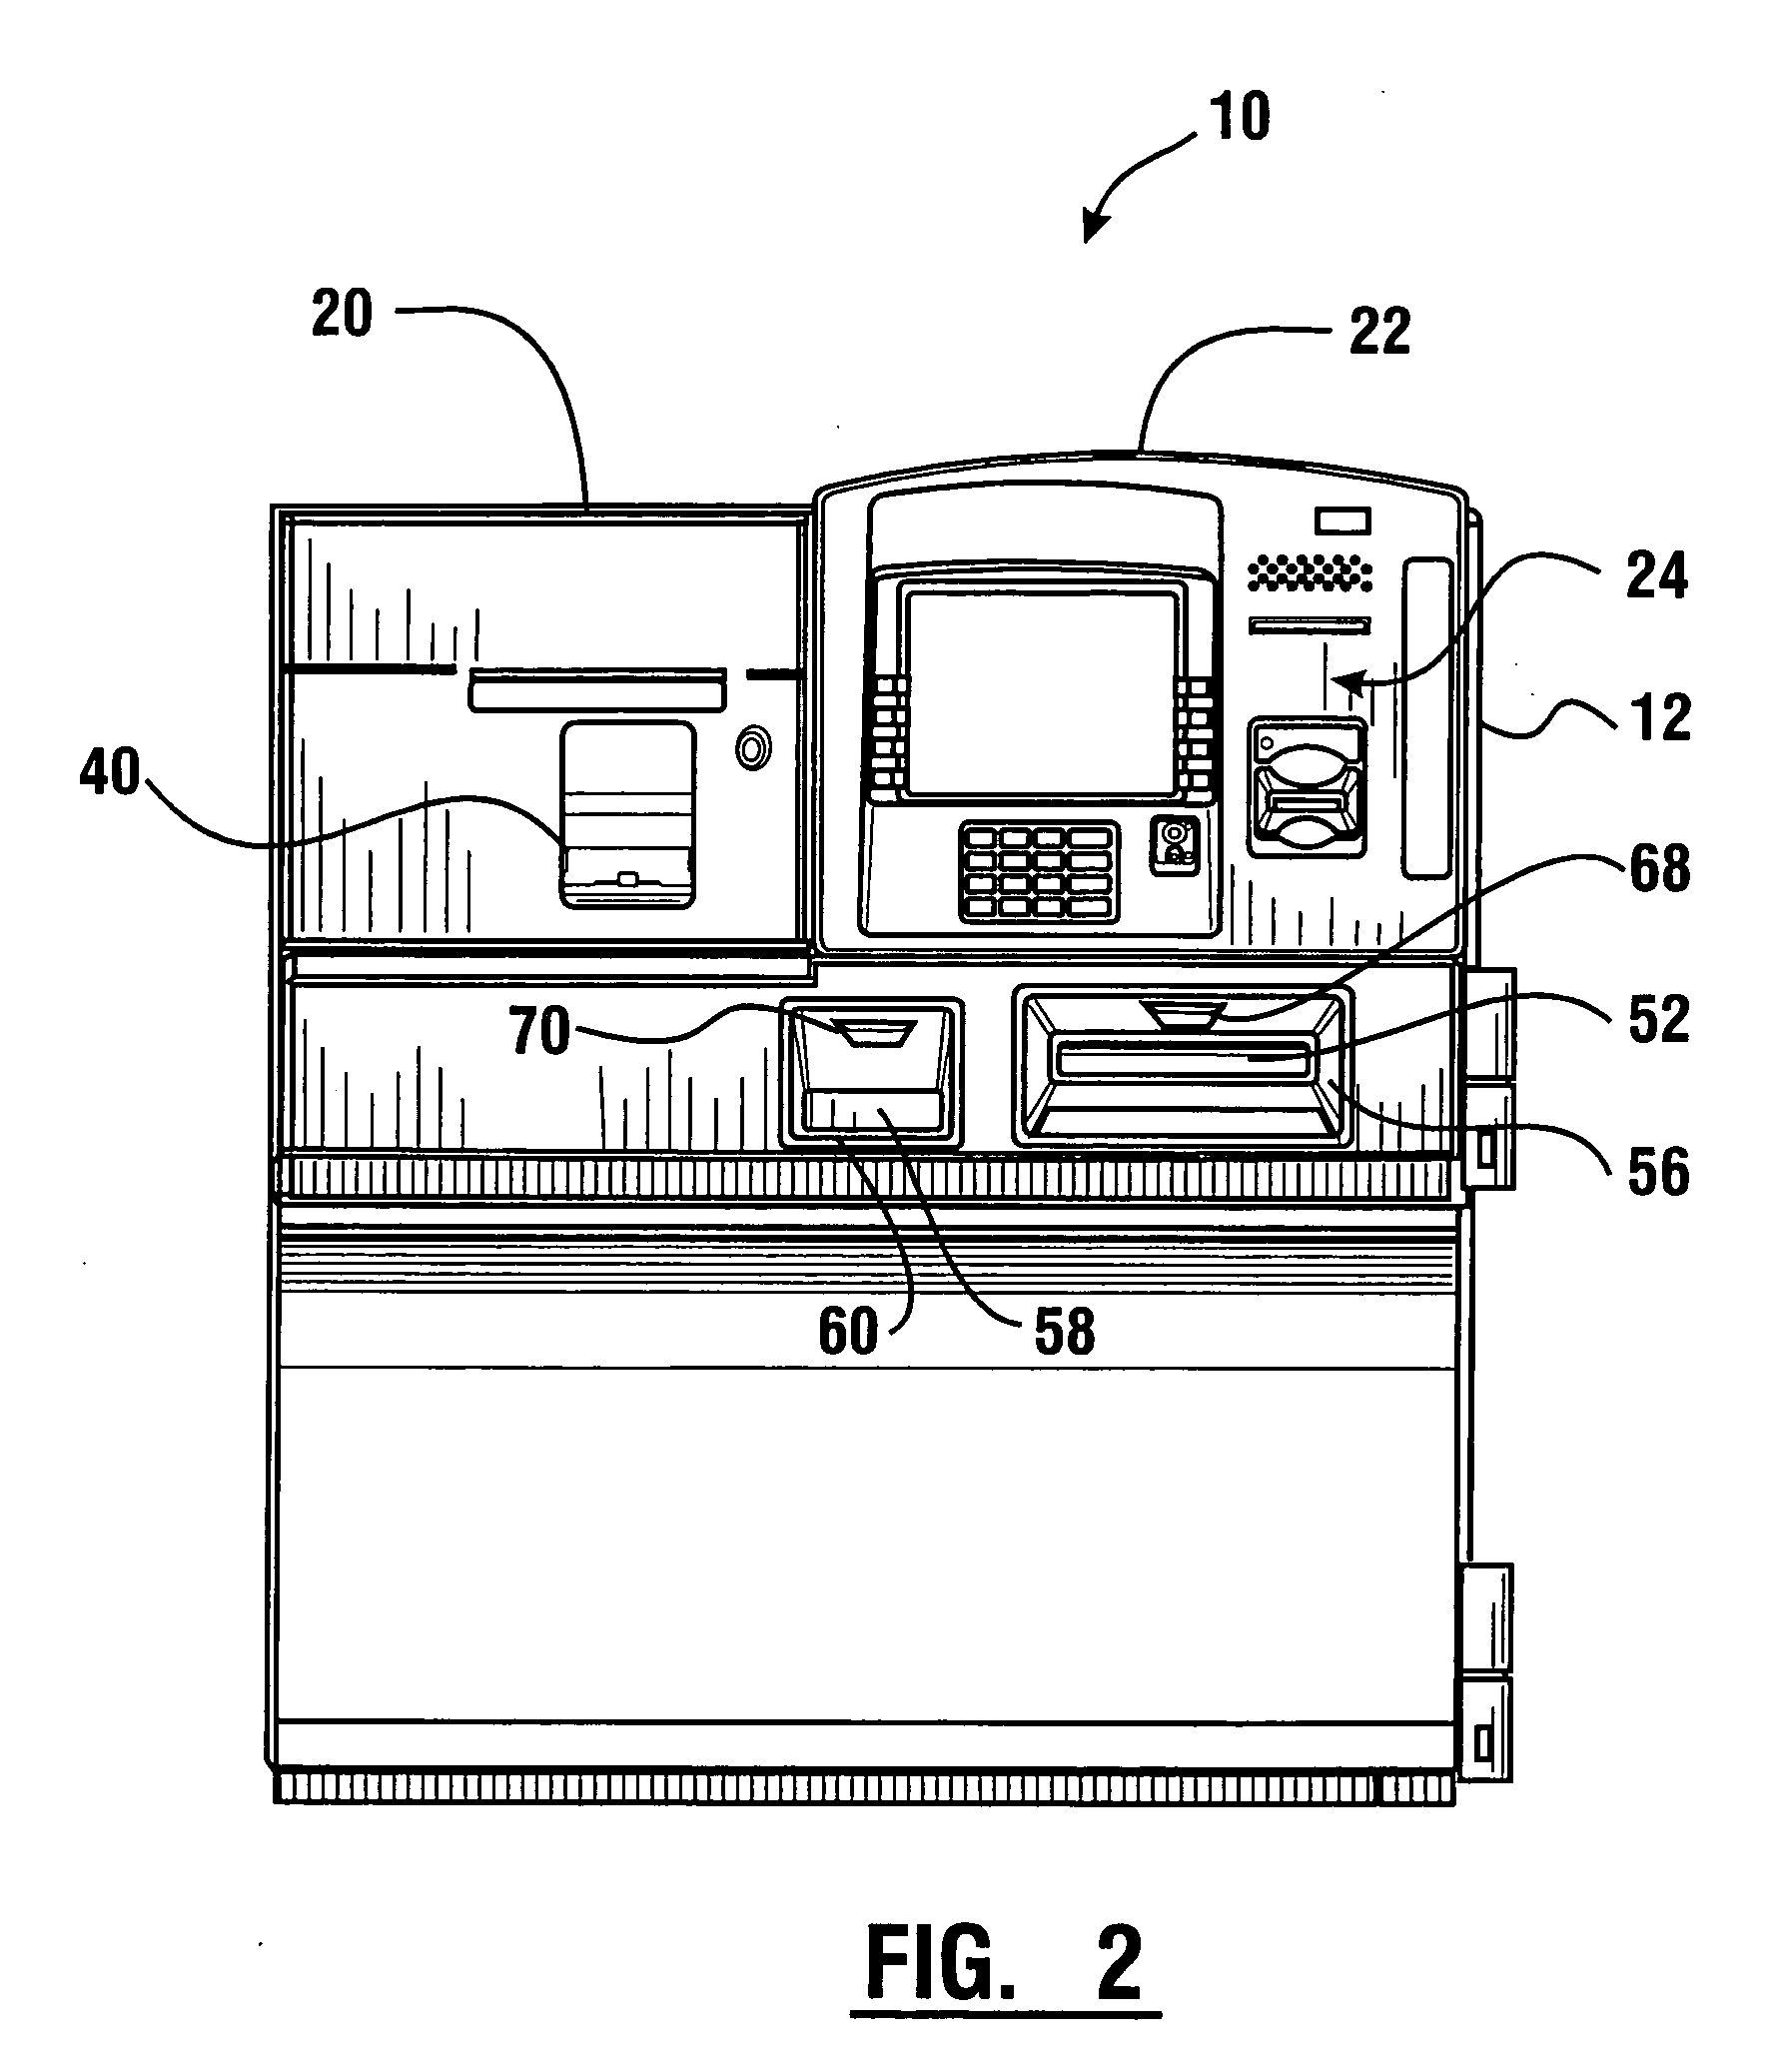 Cash dispensing automated banking machine diagnostic system and method